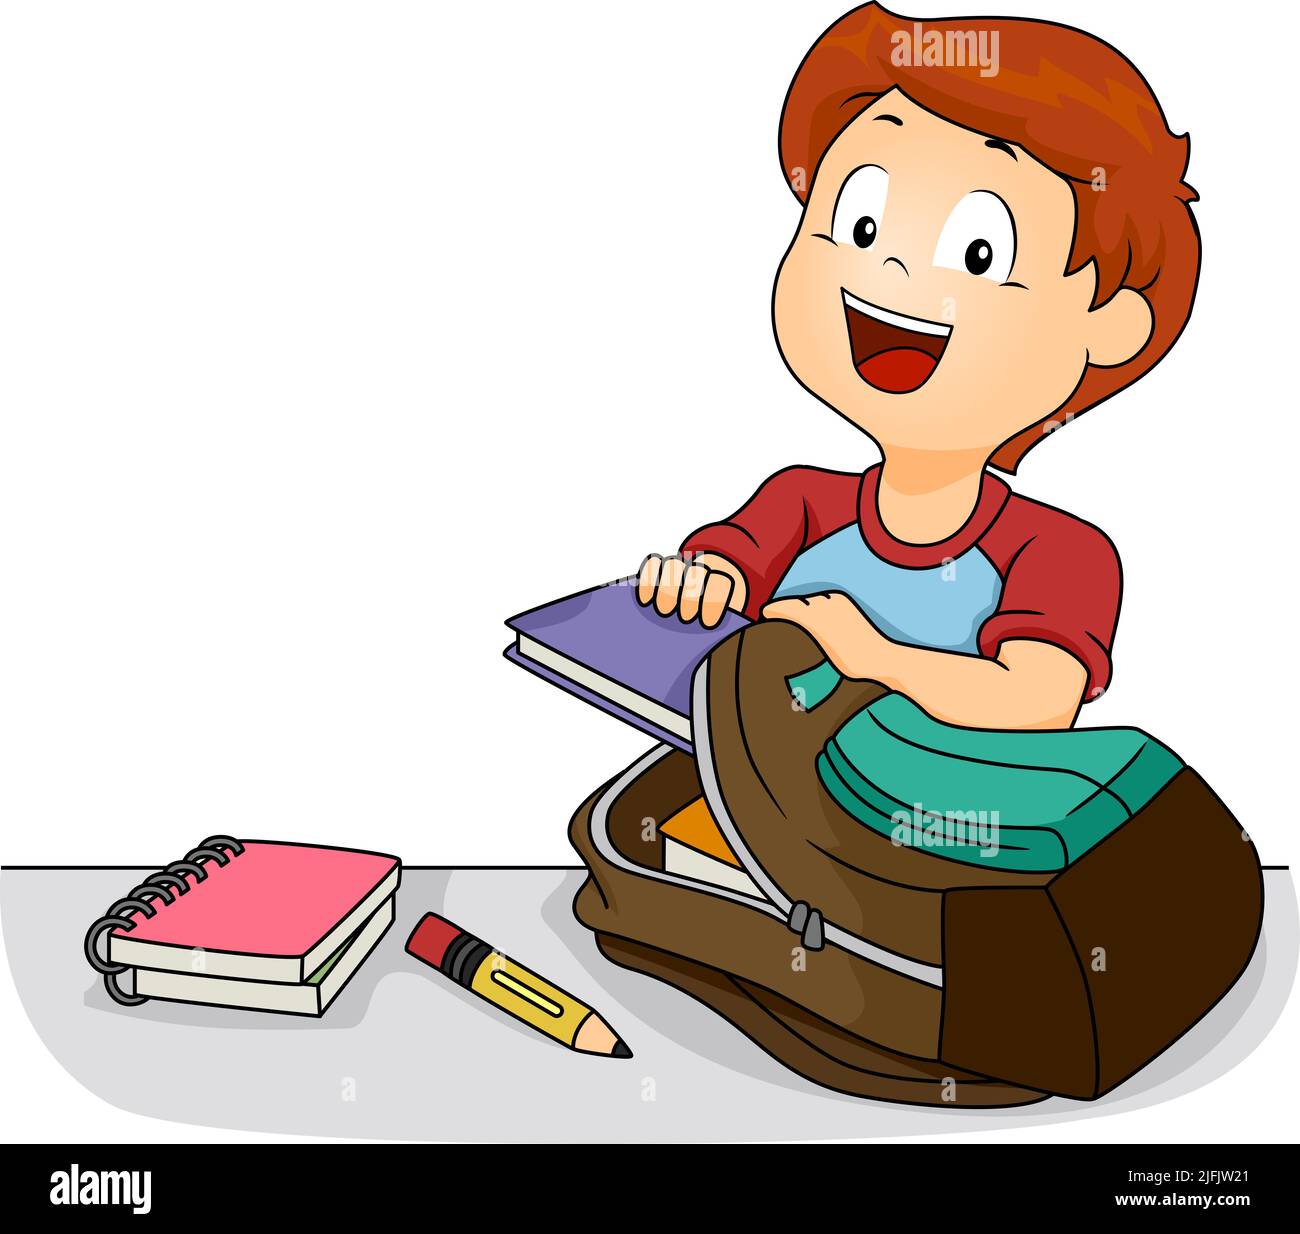 Illustration of Kid Boy Holding a Book and Emptying His Back Pack with Spiral Notebook and Pencil on the Table. After School Routine Stock Photo